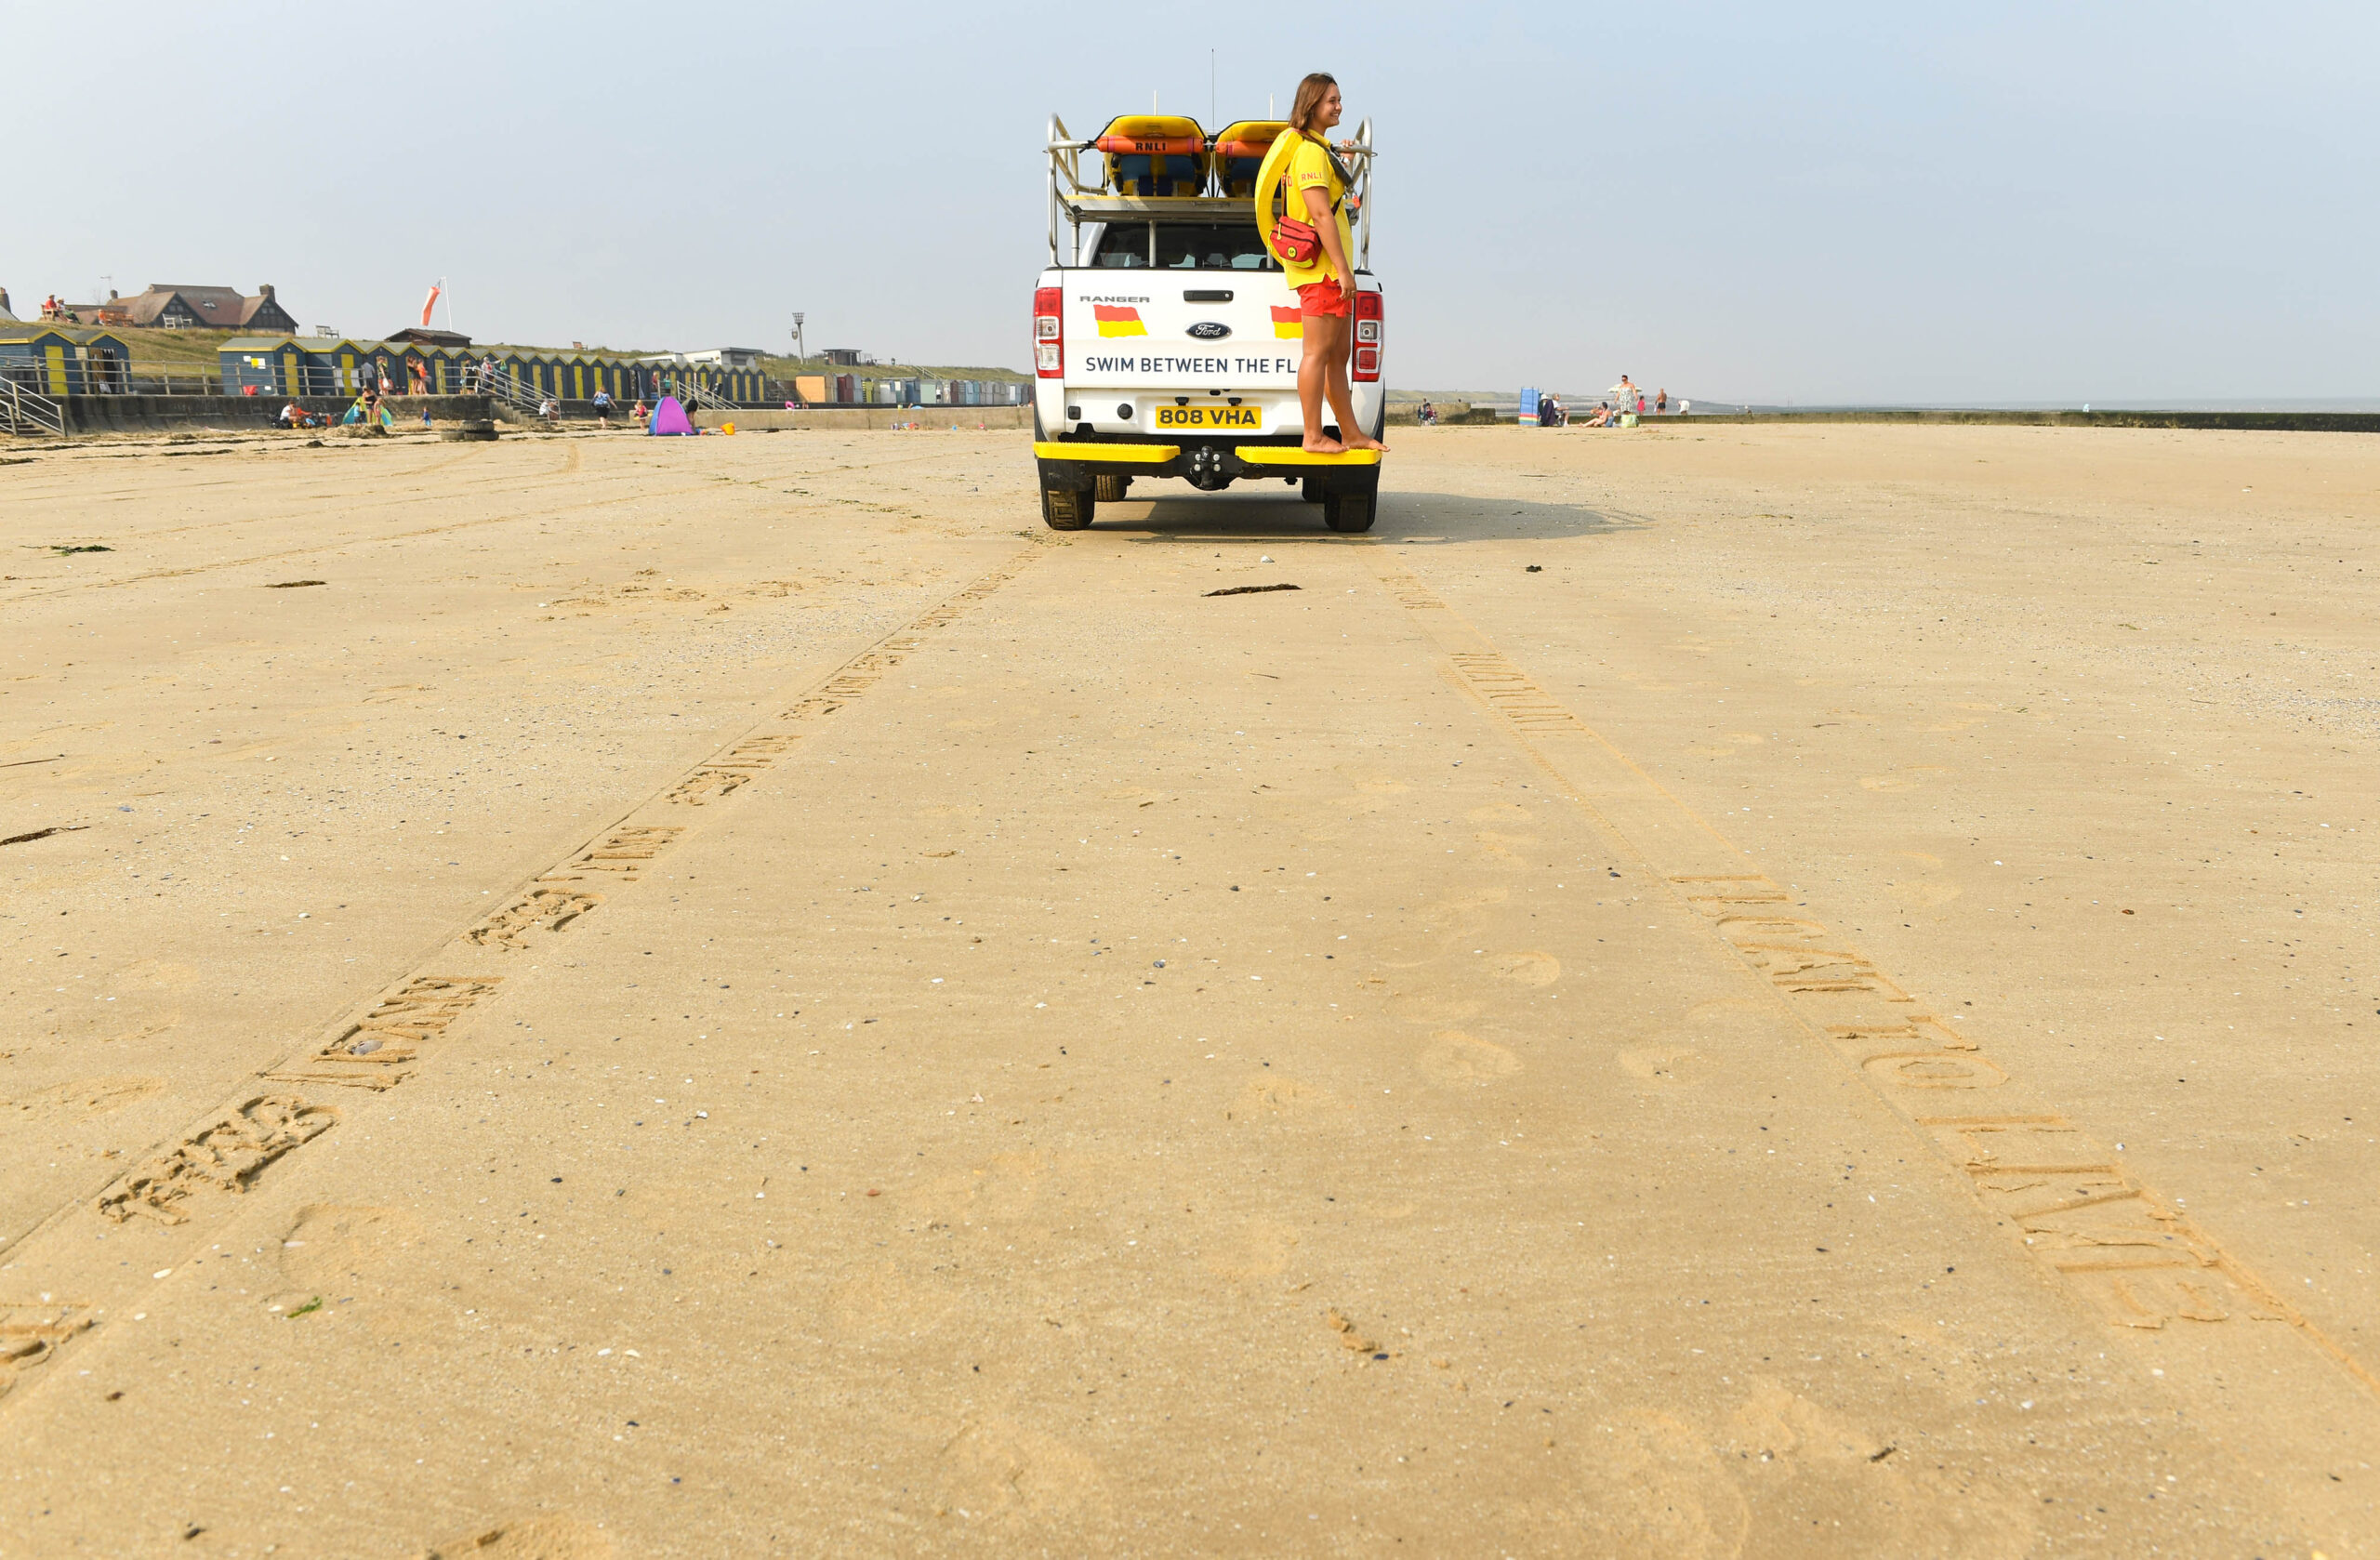 How tyres treads are helping with beach safety